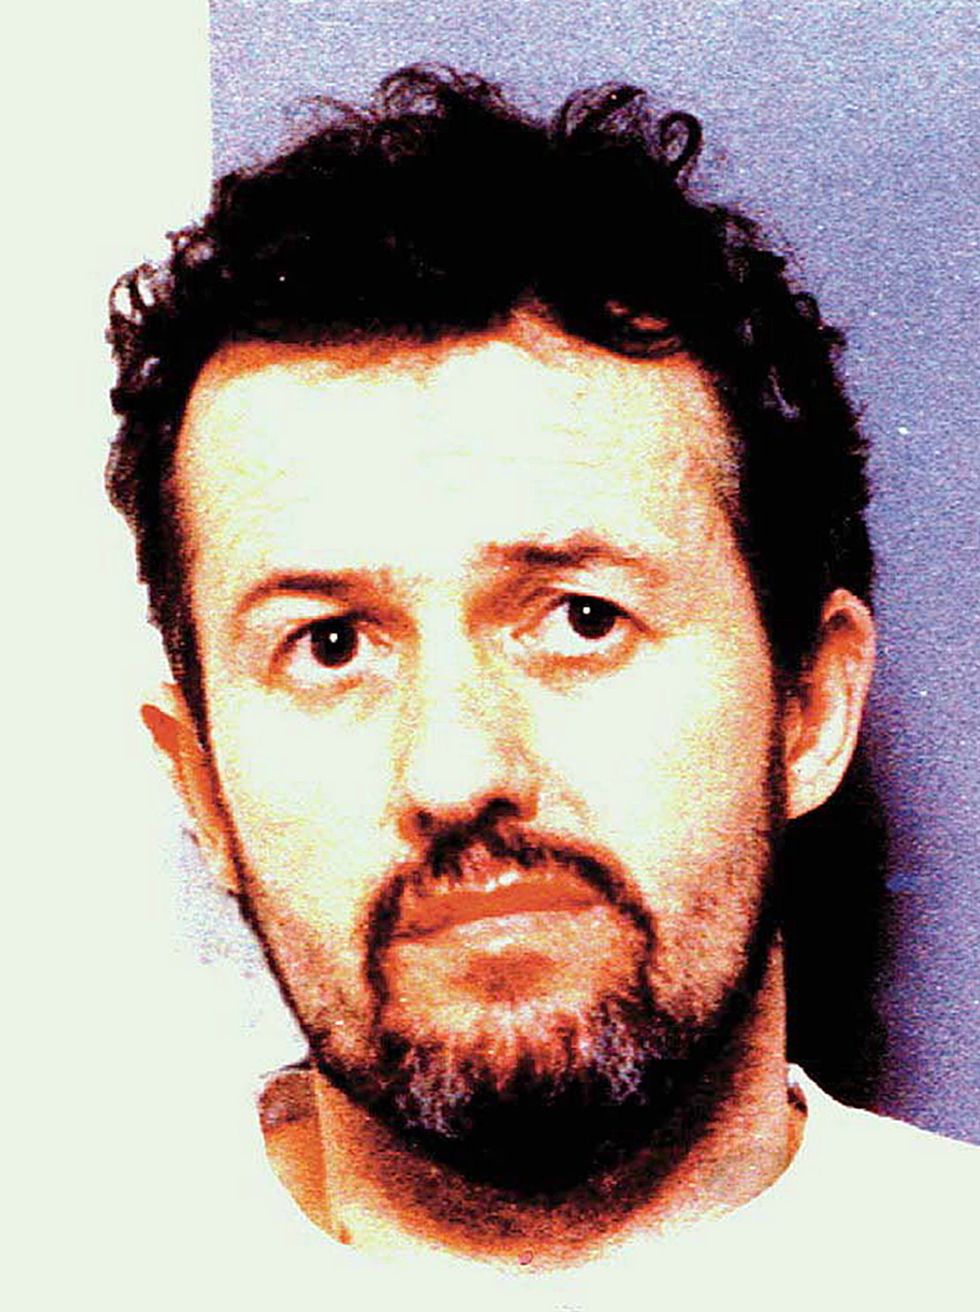 Ex-football coach and convicted paedophile Barry Bennell regularly involved in schoolboy trials at Manchester City, a High Court judge hears.